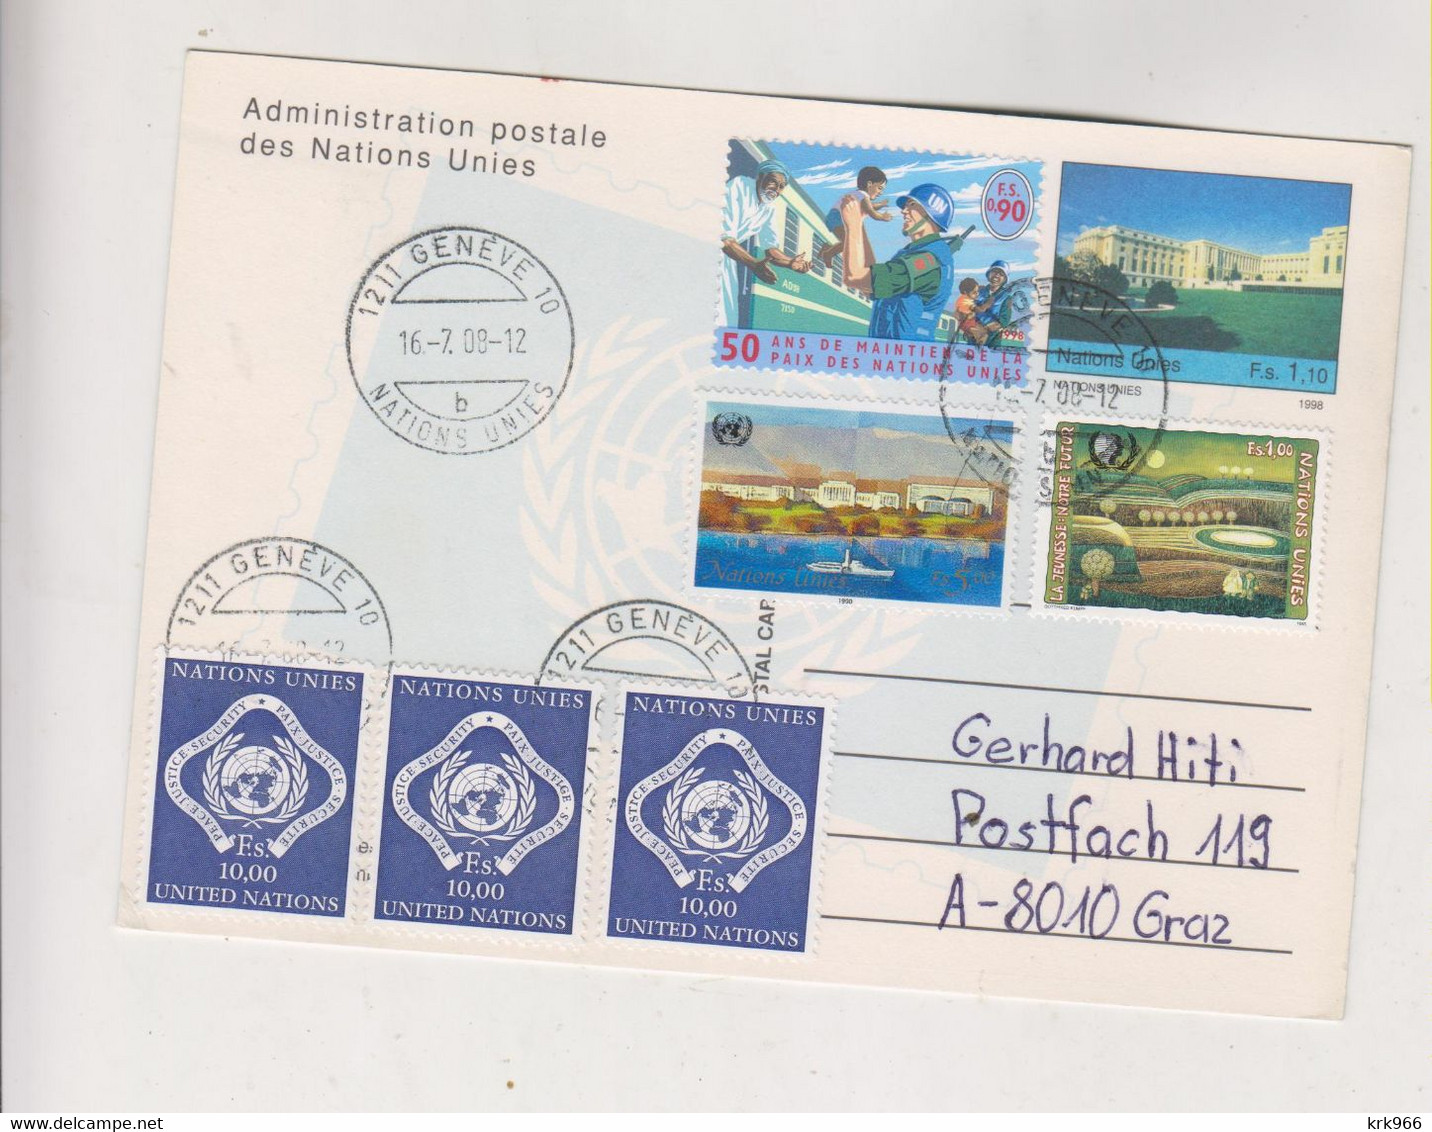 UNITED NATIONS GENEVE 2008 Nice Postcard (part Of Parcel) Used With 3 X 10 Fr Value To Austria - Covers & Documents